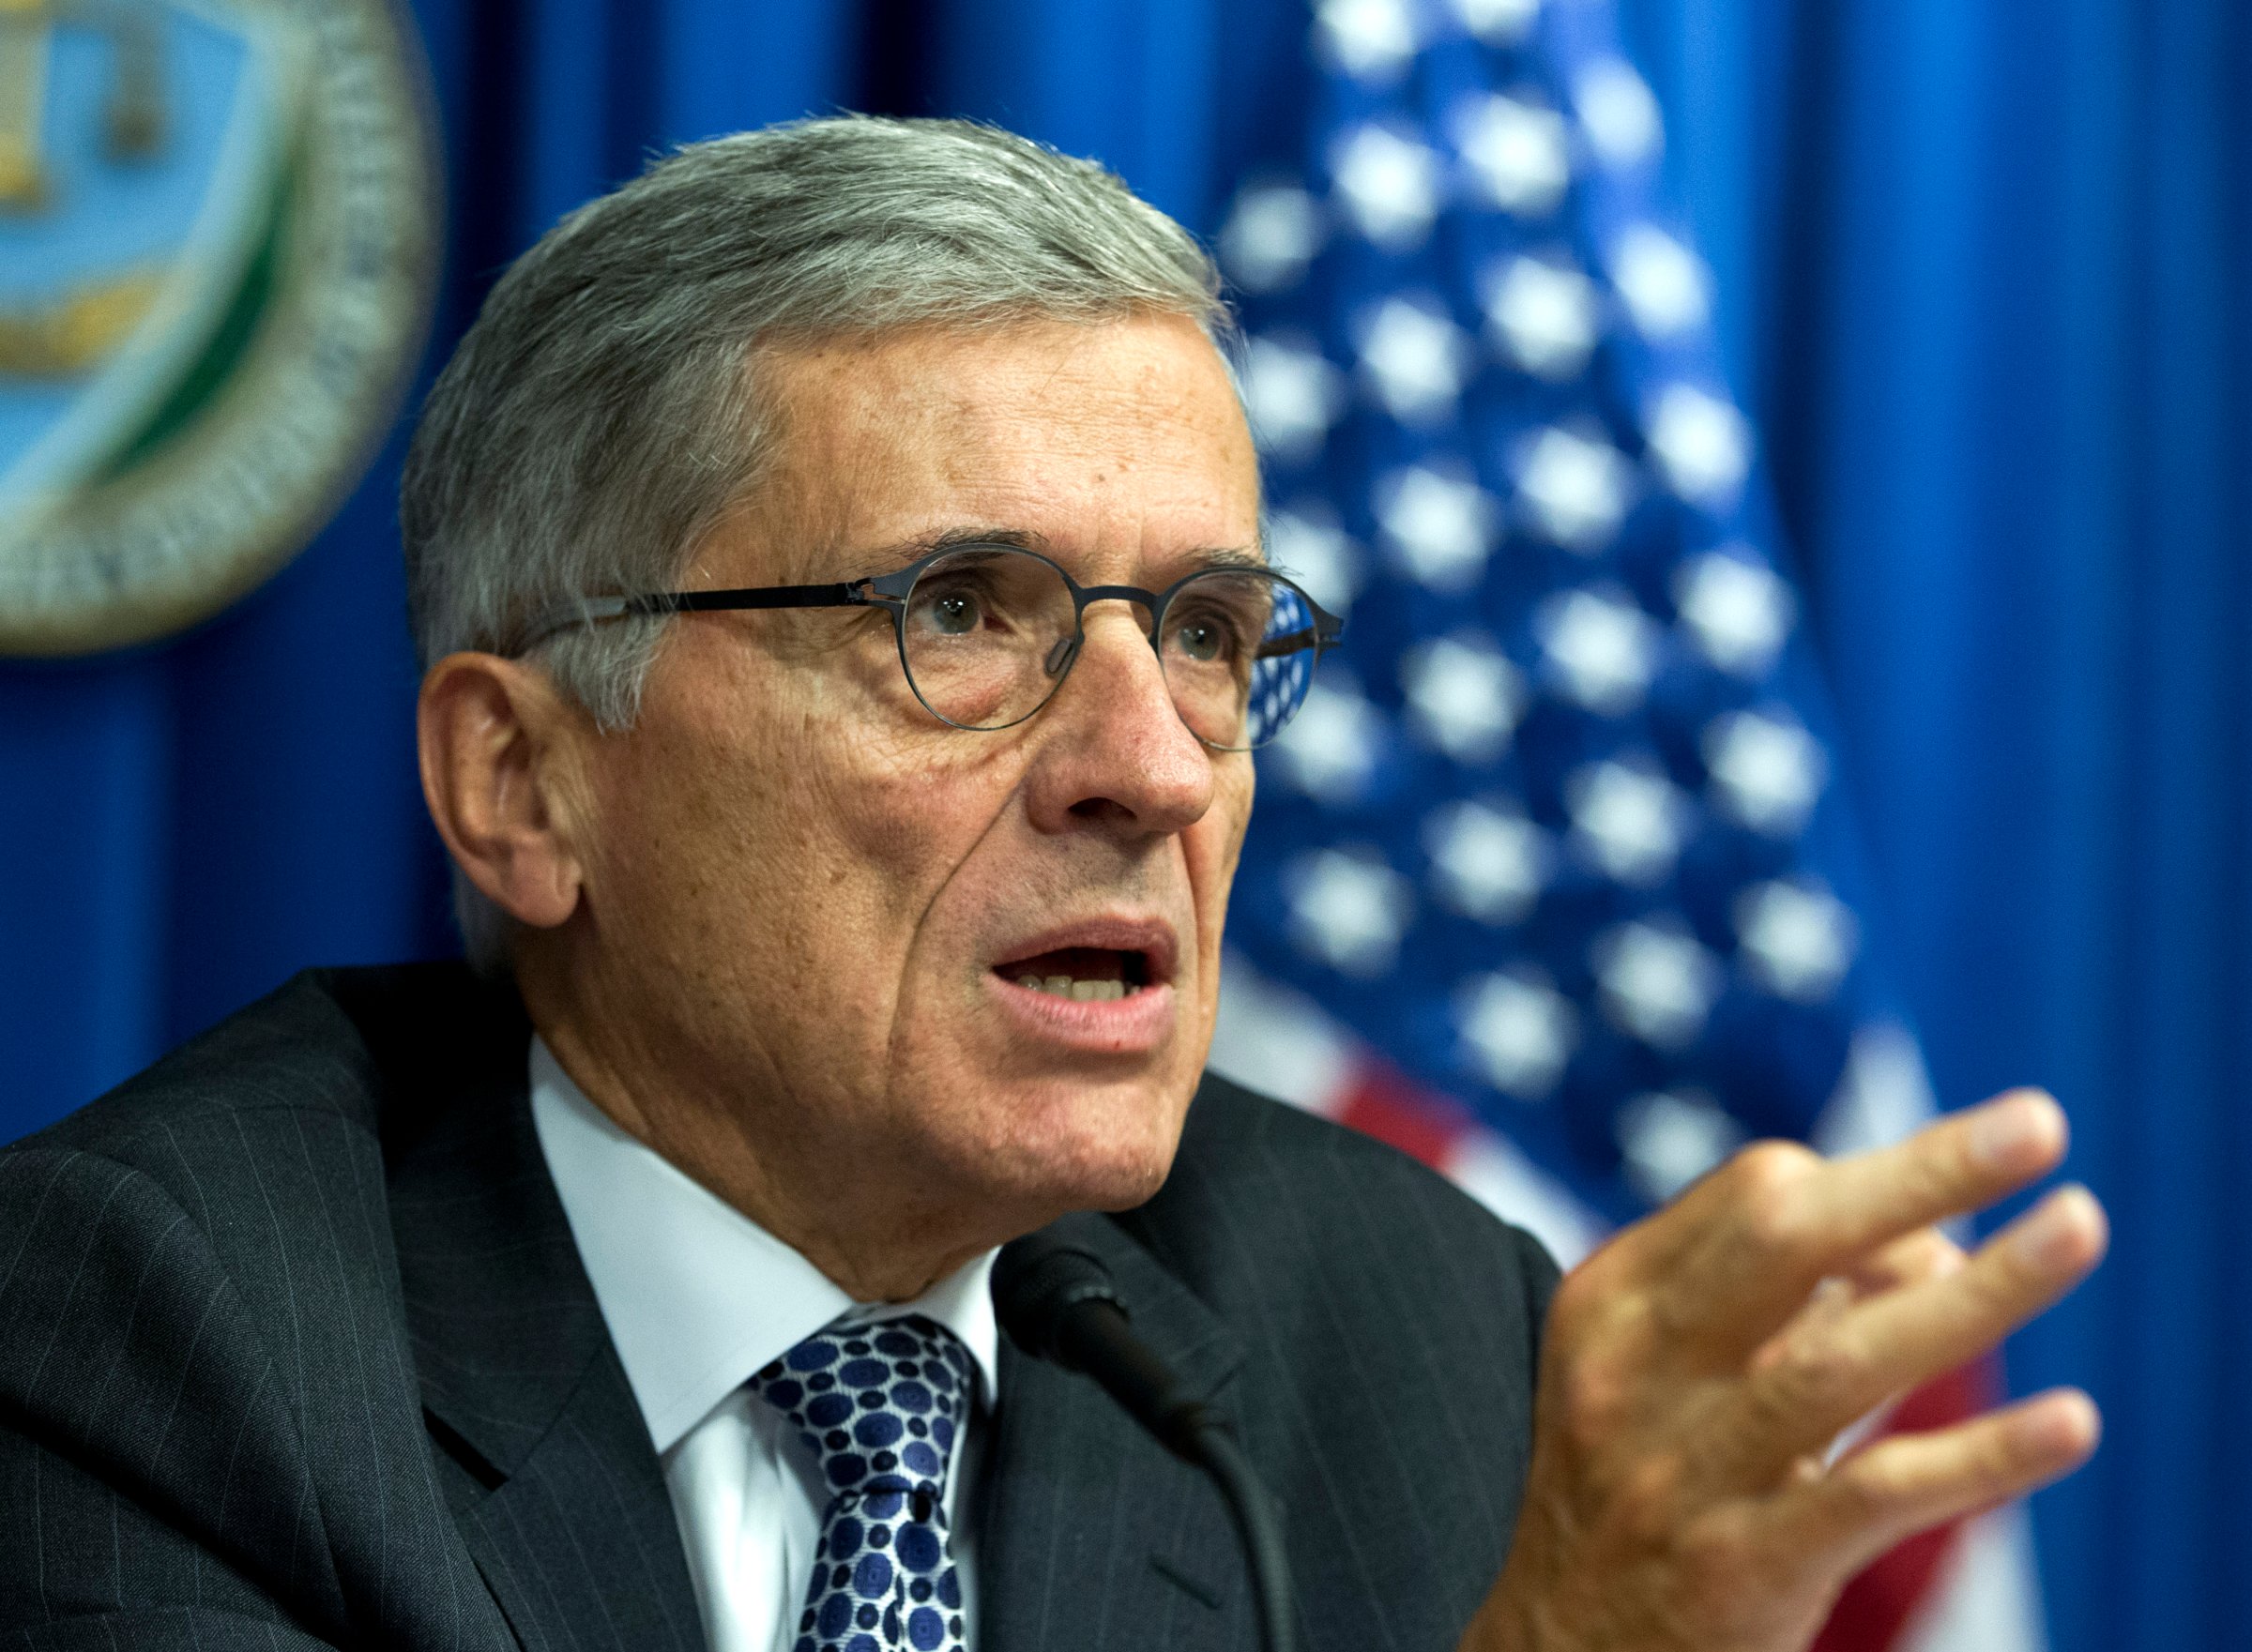 Federal Communications Commission (FCC) Chairman Tom Wheeler speaks during new conference in Washington on Oct. 8, 2014.